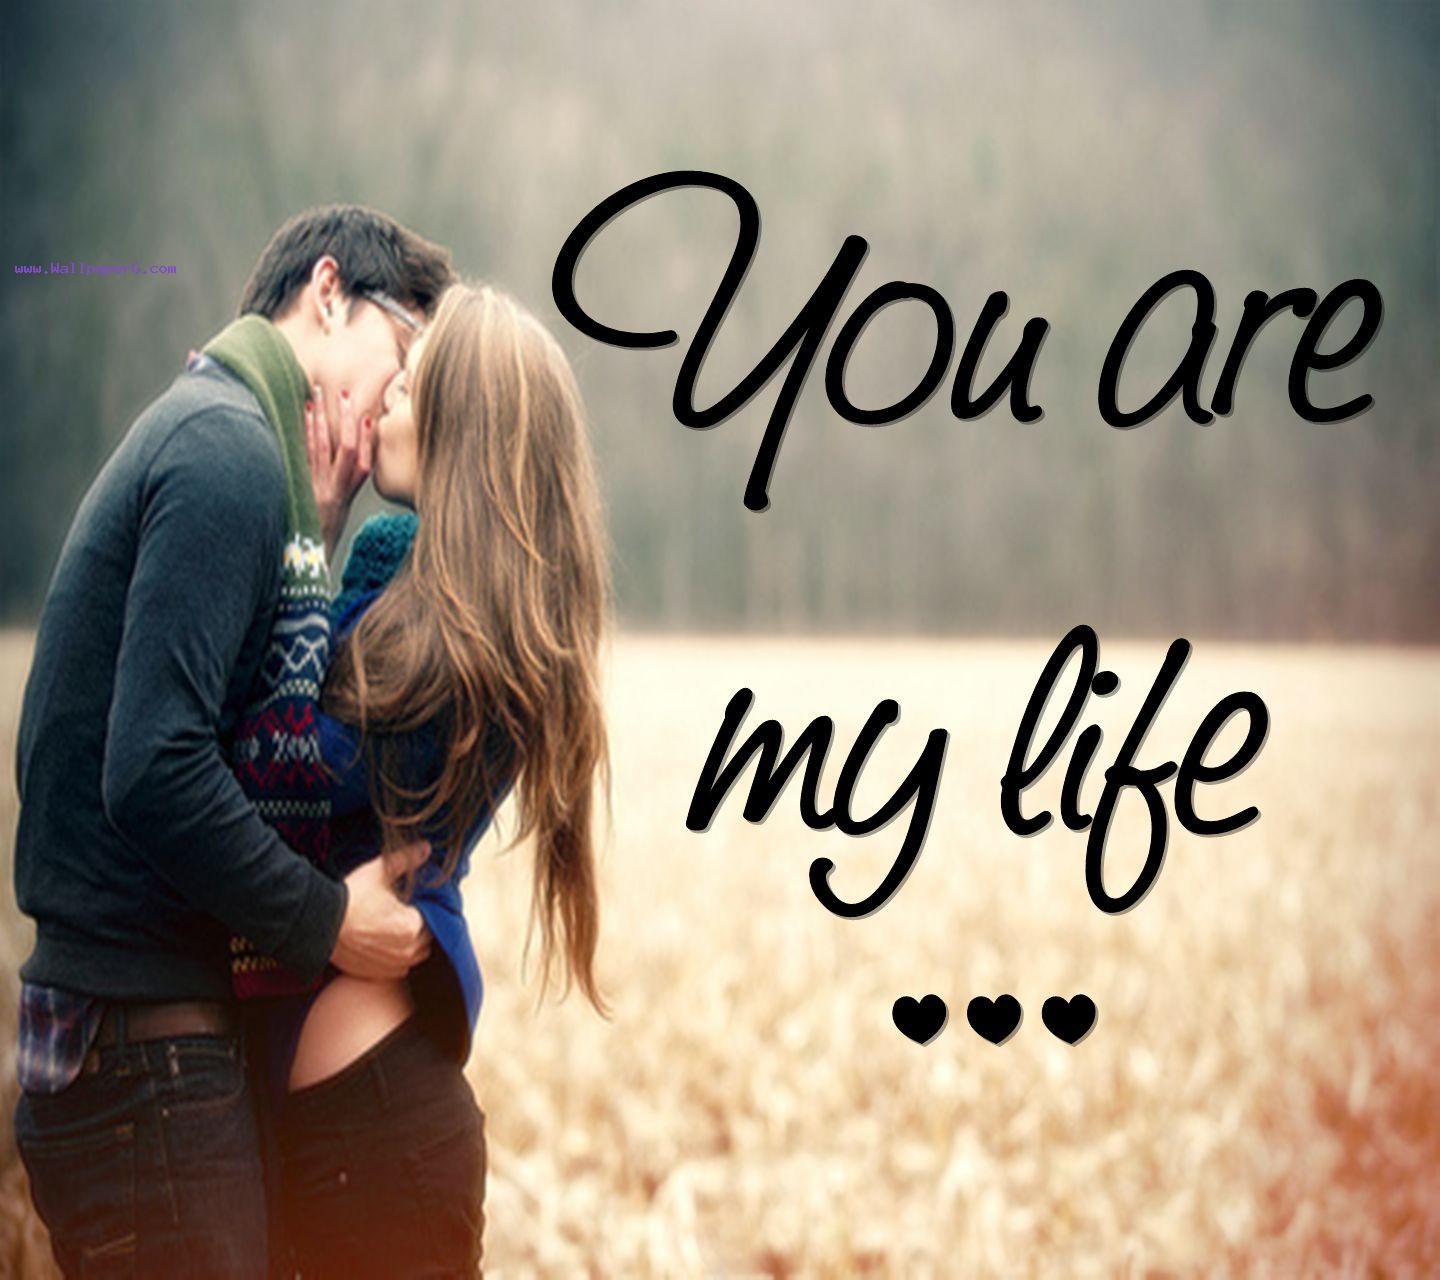 loving couple wallpaper with quotes